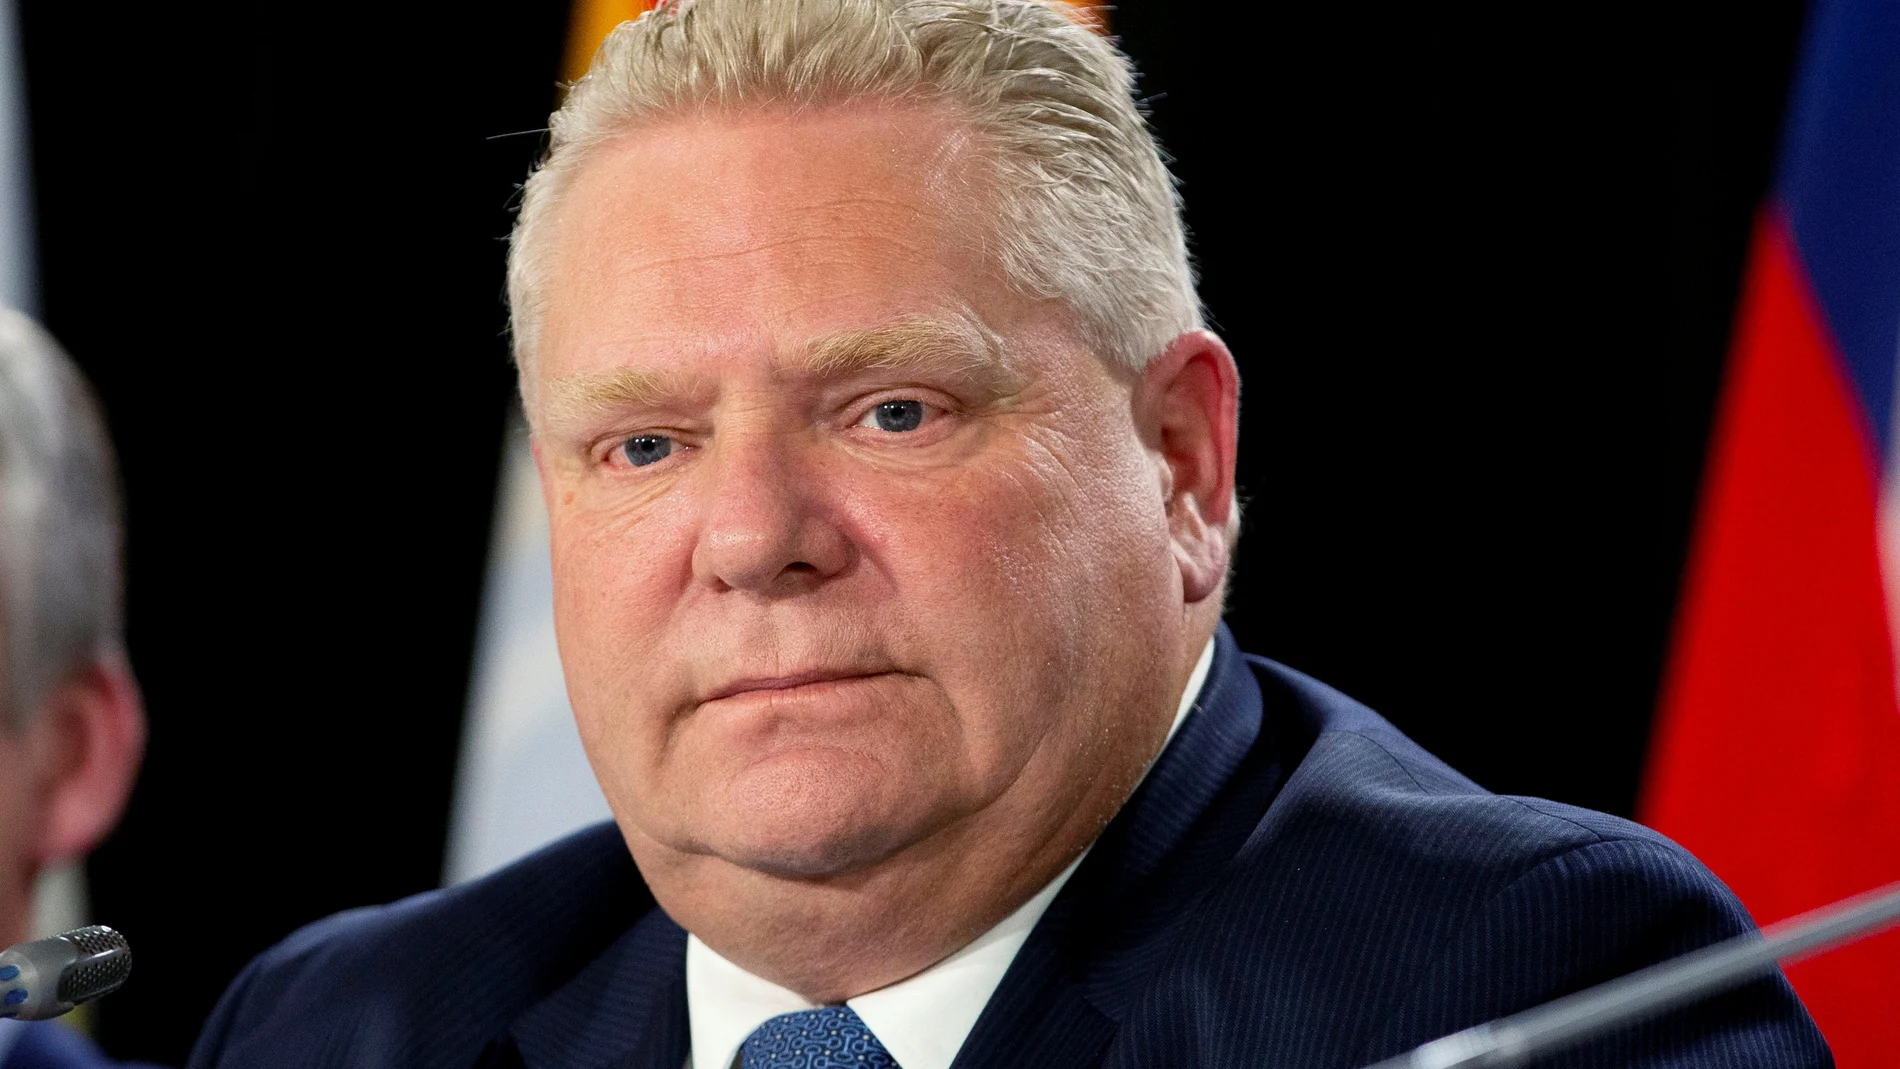 FILE PHOTO: Ontario Premier Doug Ford is seen after a meeting with Canada's provincial premiers in Toronto, Ontario, Canada December 2, 2019. REUTERS/Carlos Osorio/File Photo